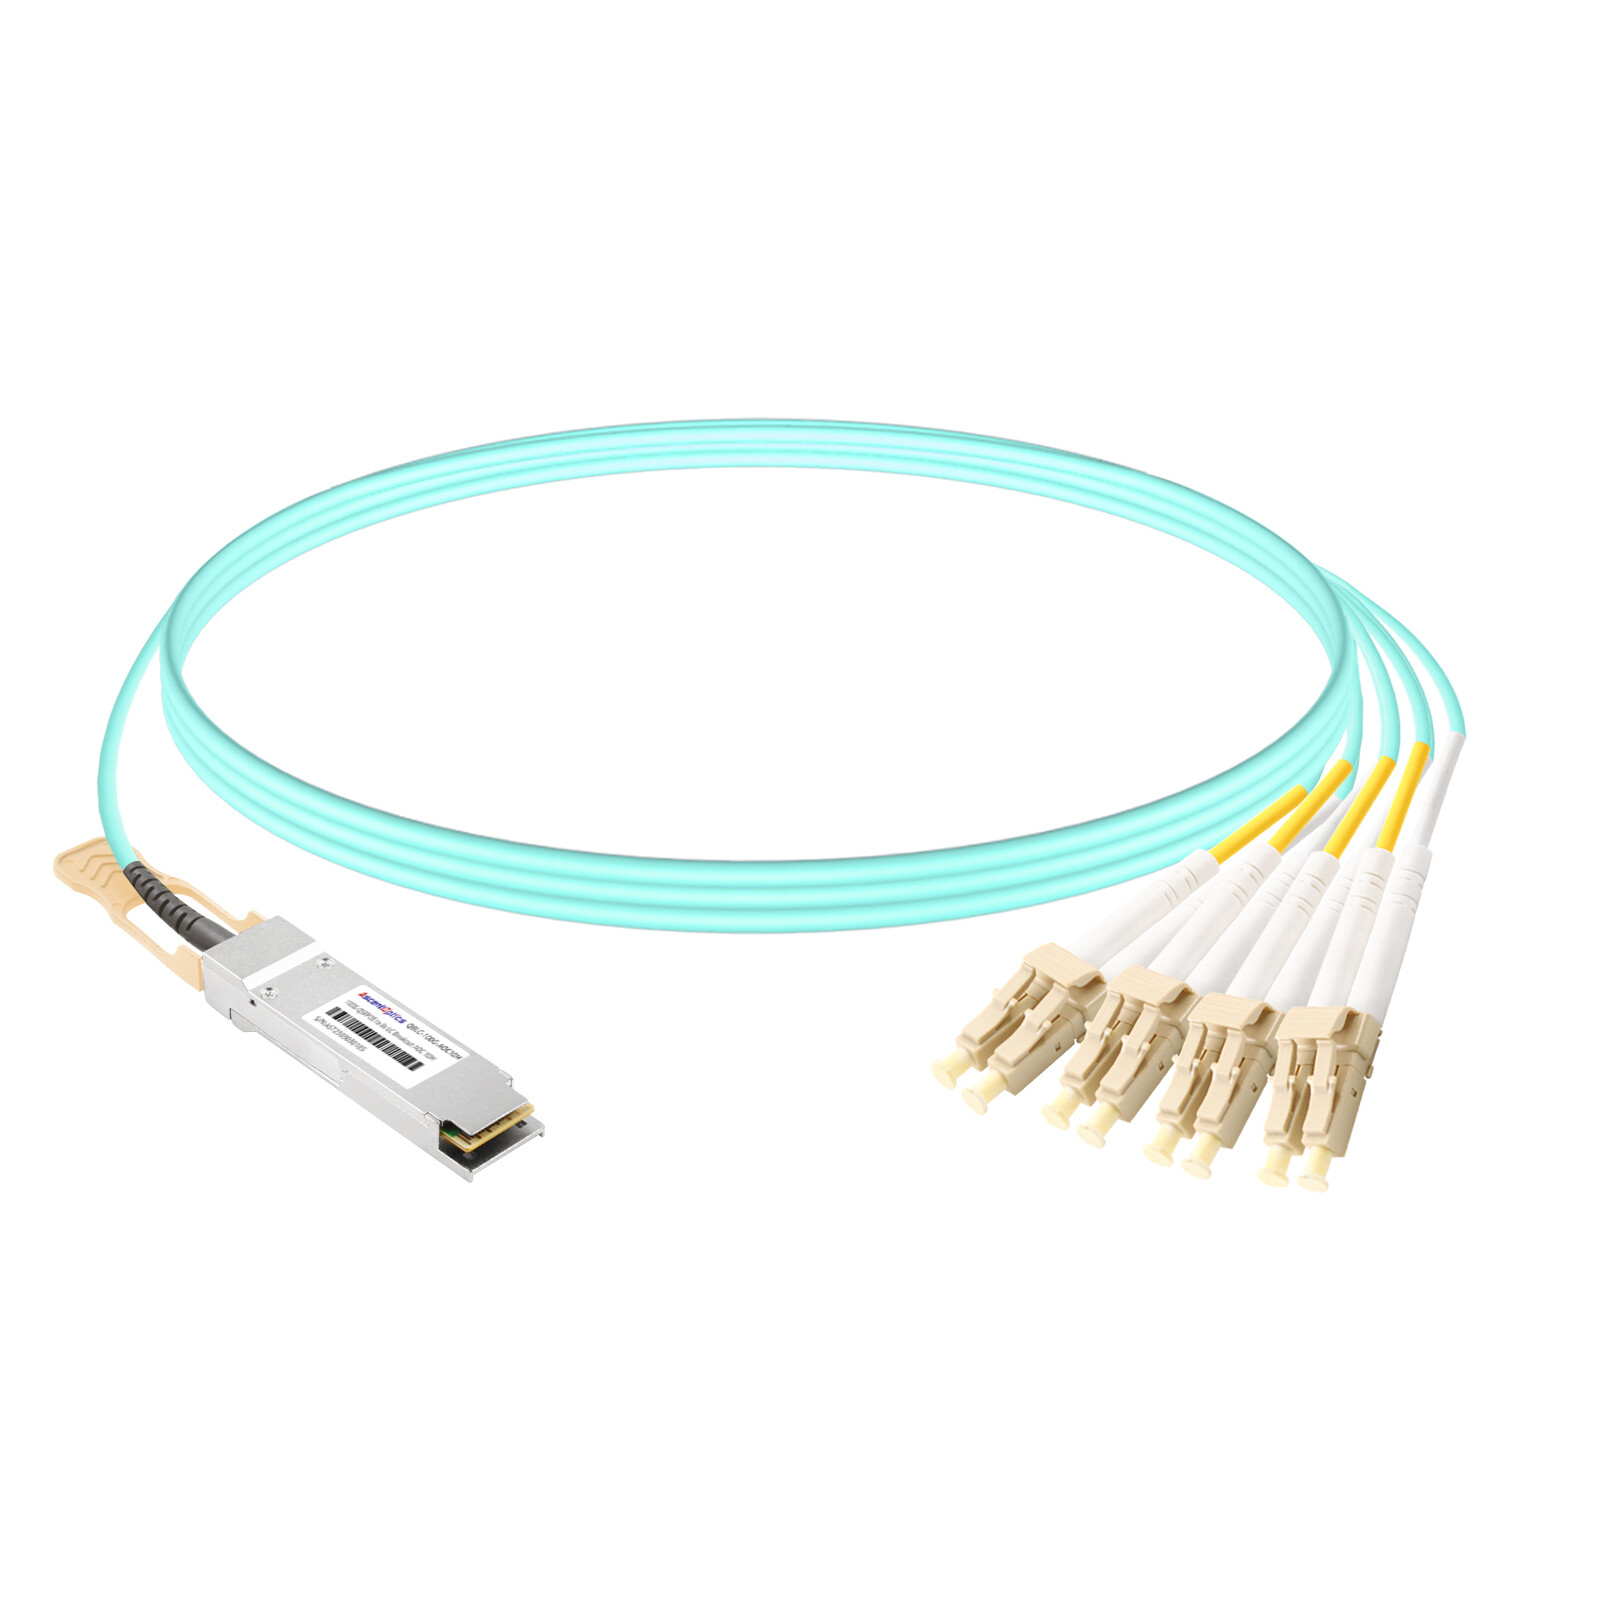 100G QSFP28 to 8x LC Breakout AOC Cable,10 Meters